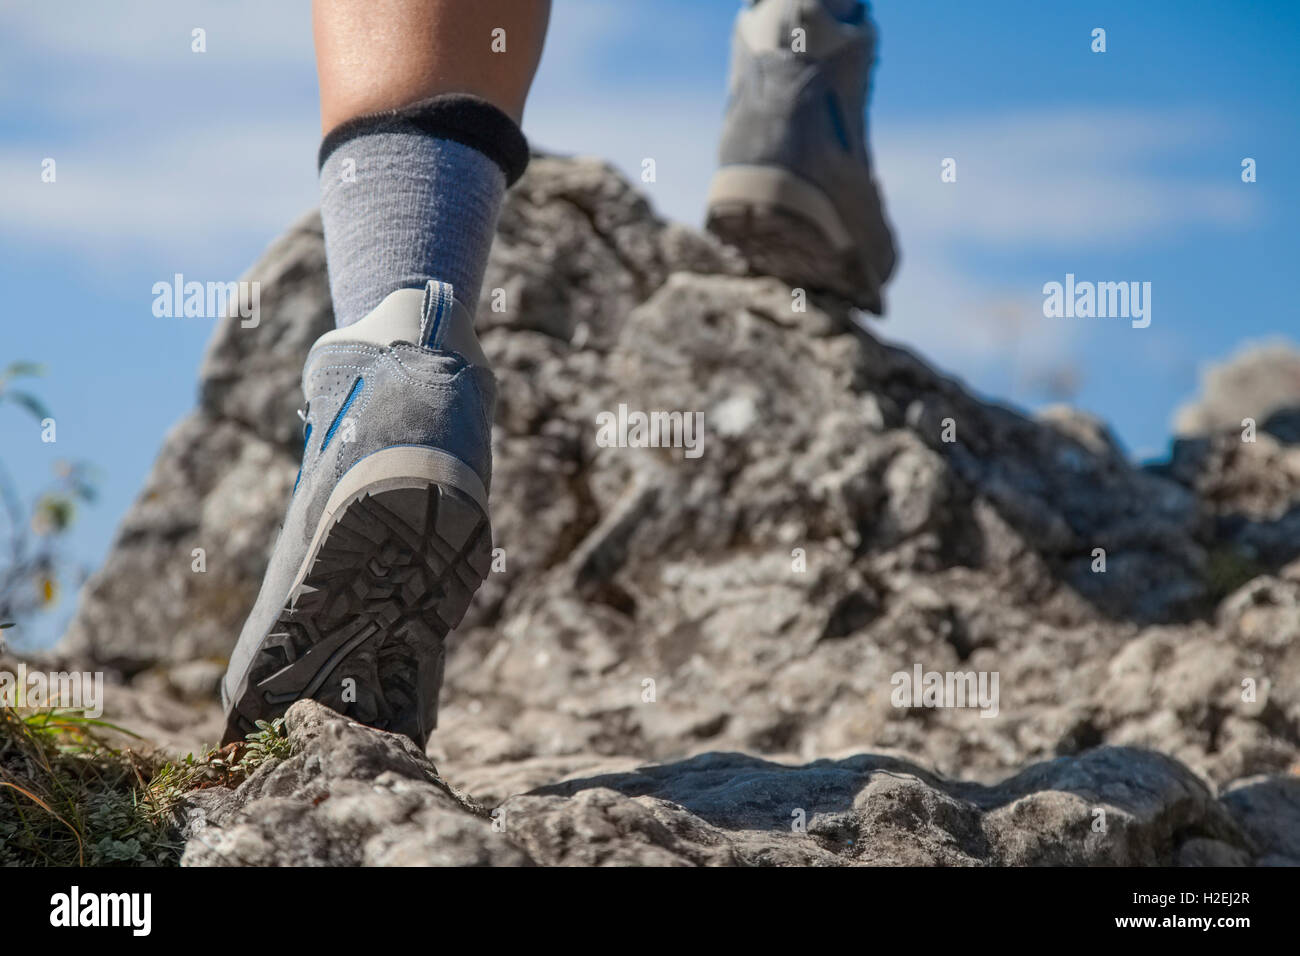 Close up of hiking boots and legs climbing up rocky trail Stock Photo